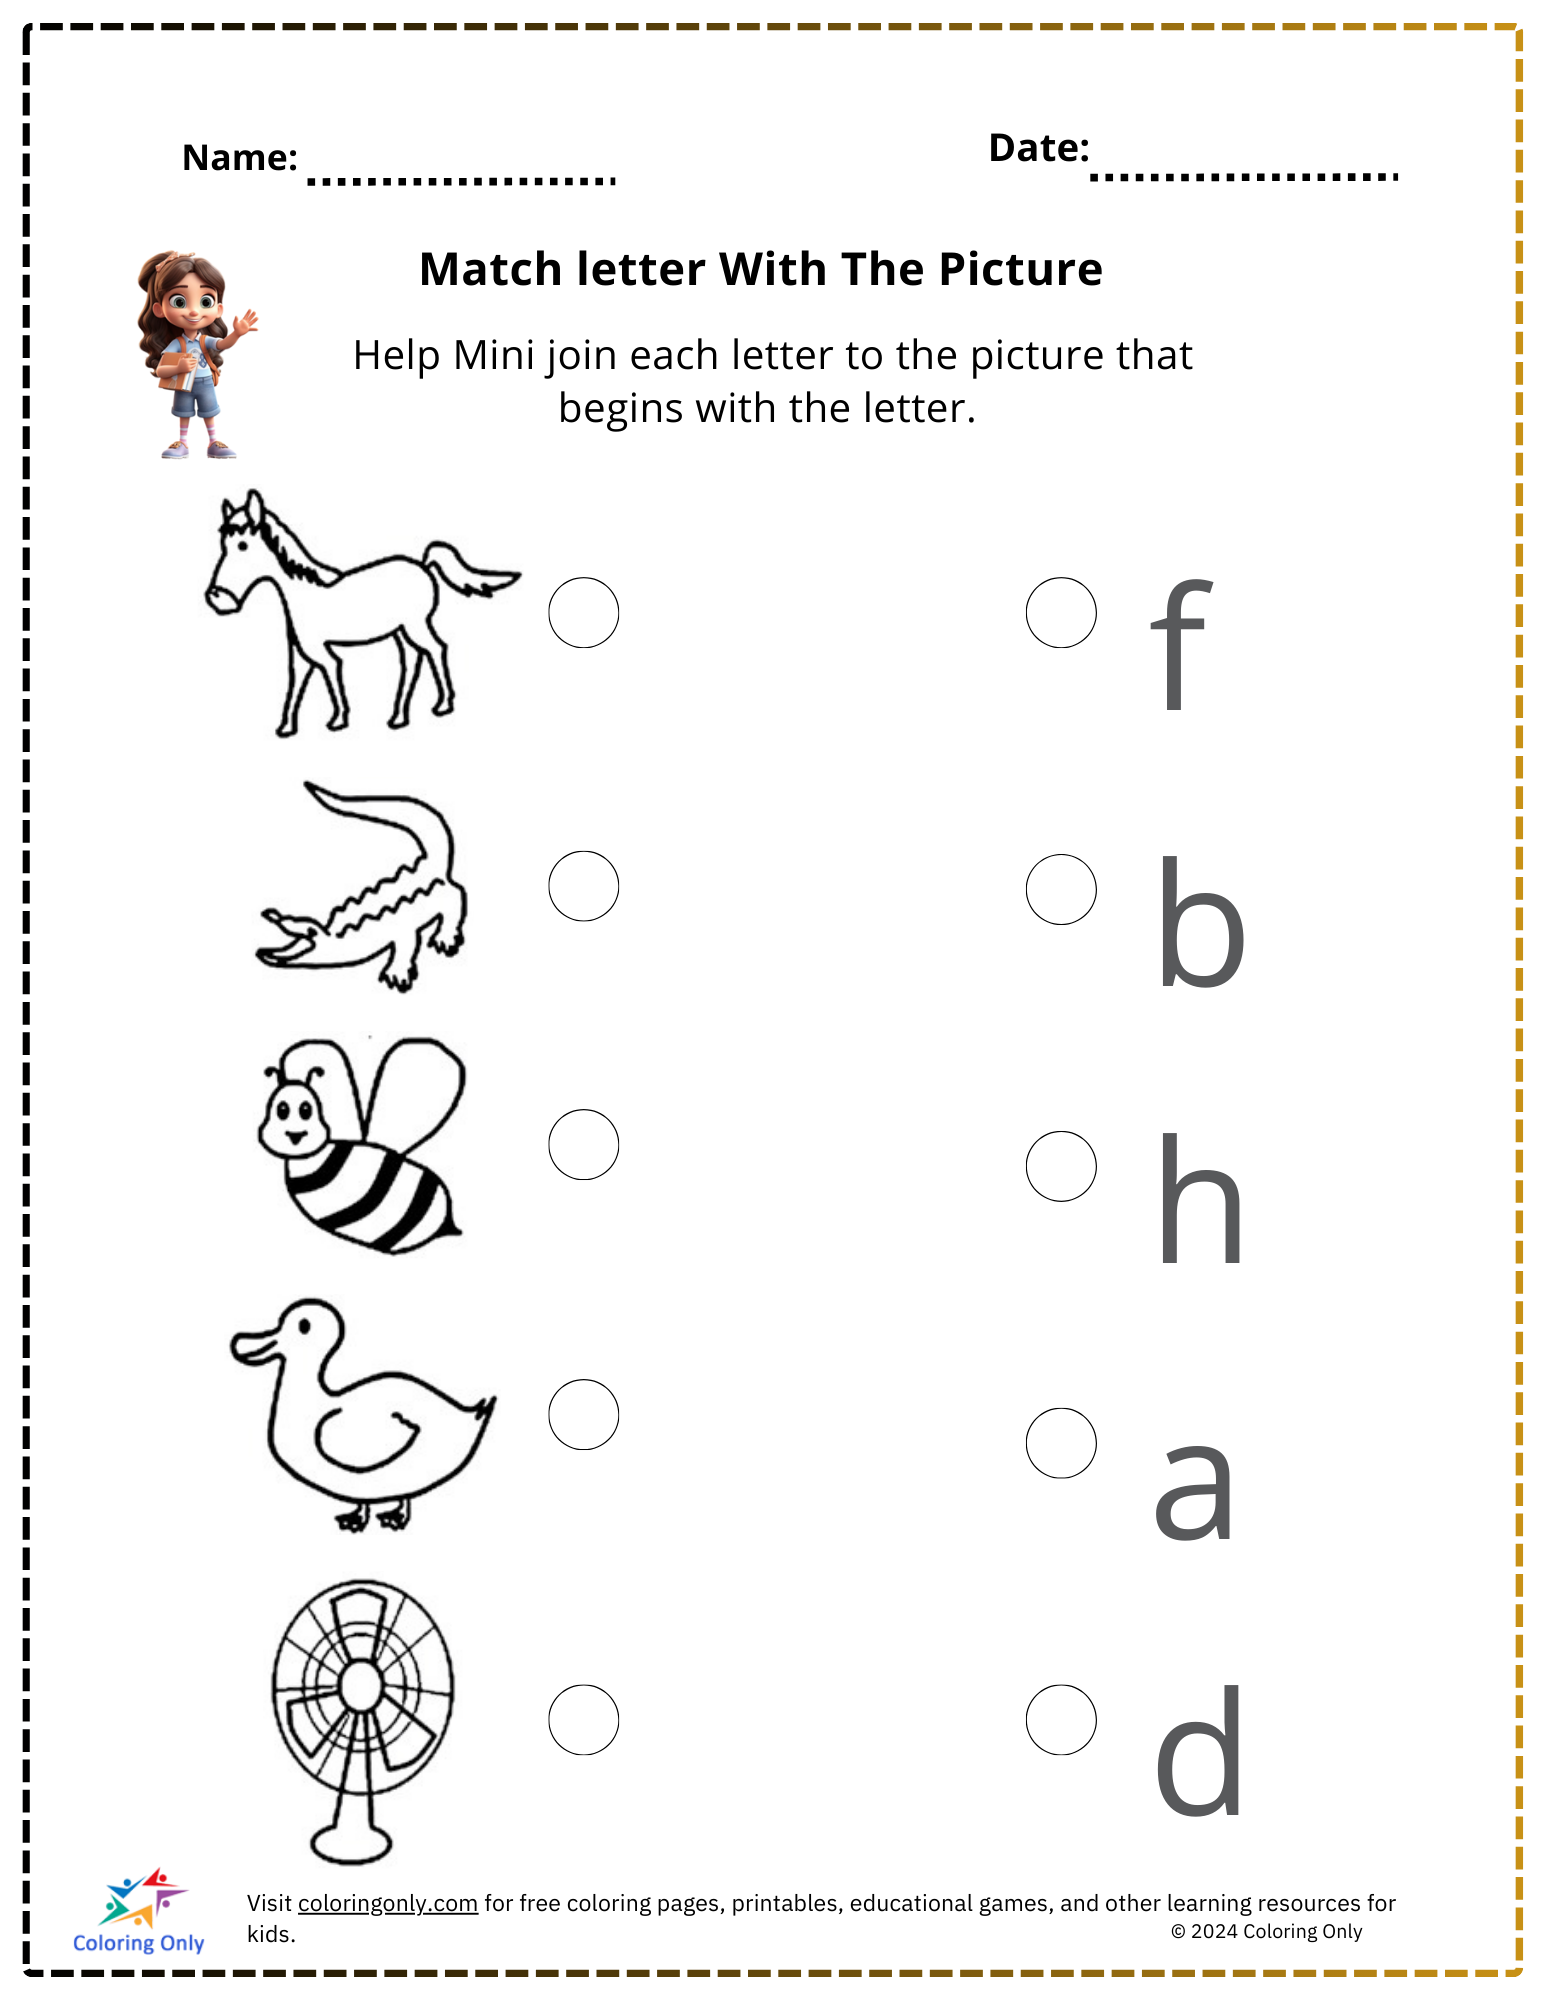 Match letter With The Picture Free Printable Worksheet